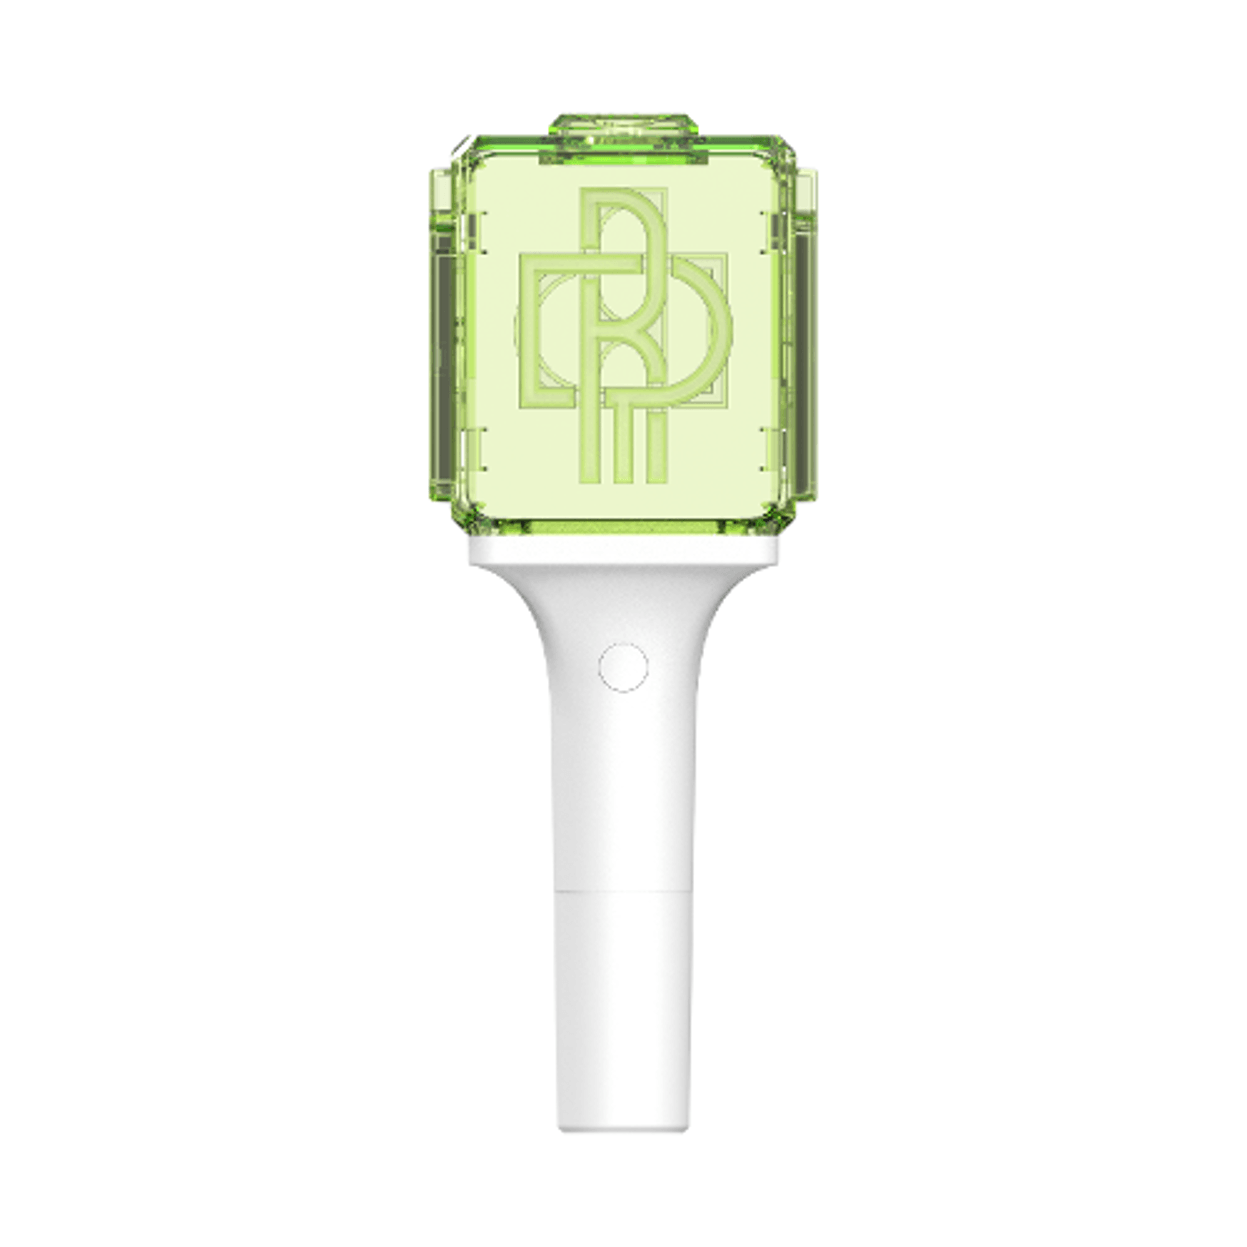 NCT - OFFICIAL FANLIGHT ver. 2 (NCT DREAM ver.) - Shopping Around the World with Goodsnjoy